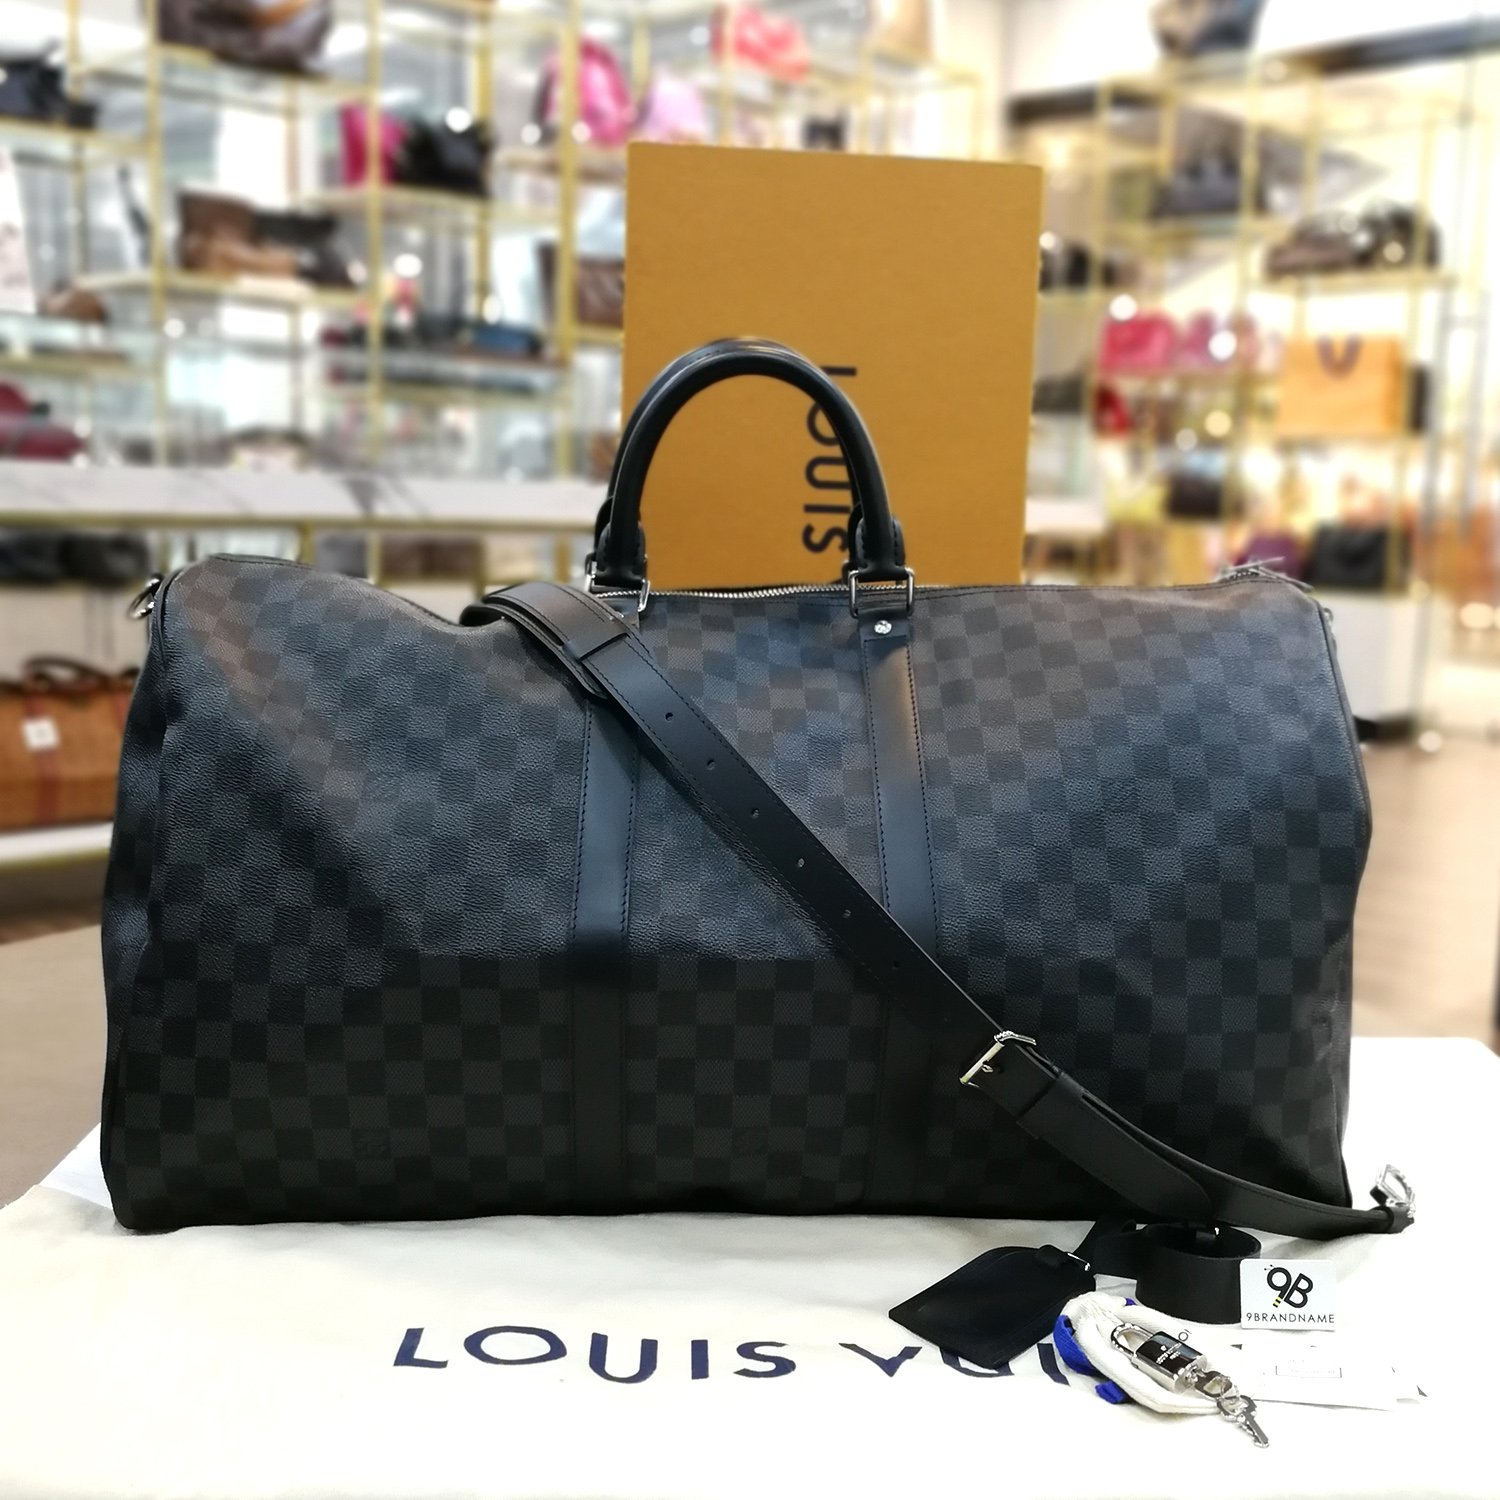 Authentic Second Hand Louis Vuitton Trevi PM Shoulder Bag PSS73000001   THE FIFTH COLLECTION